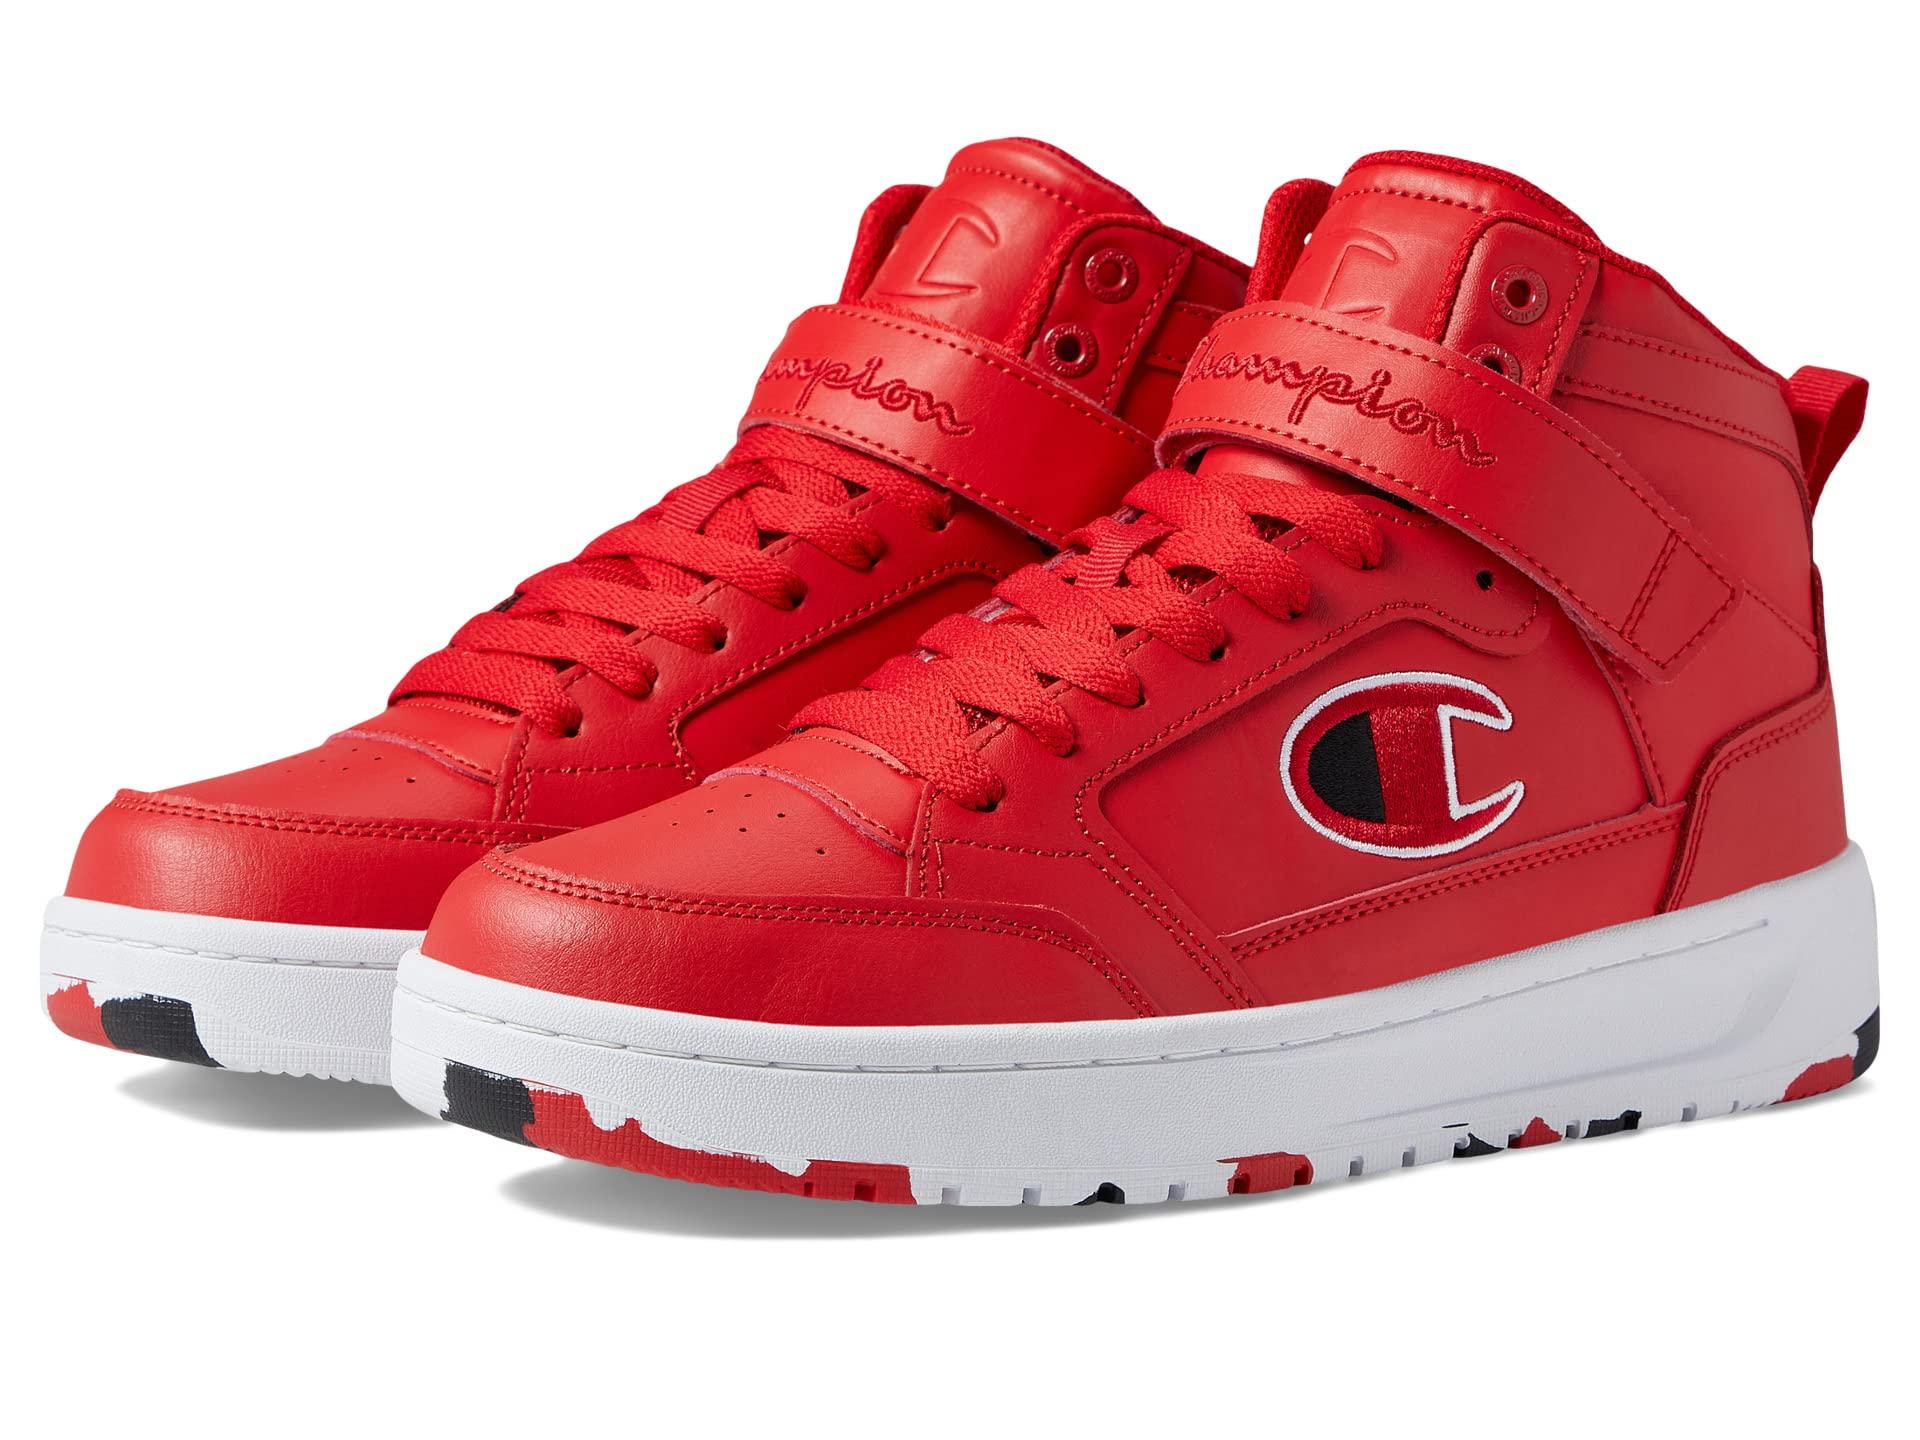 red high top champion shoes